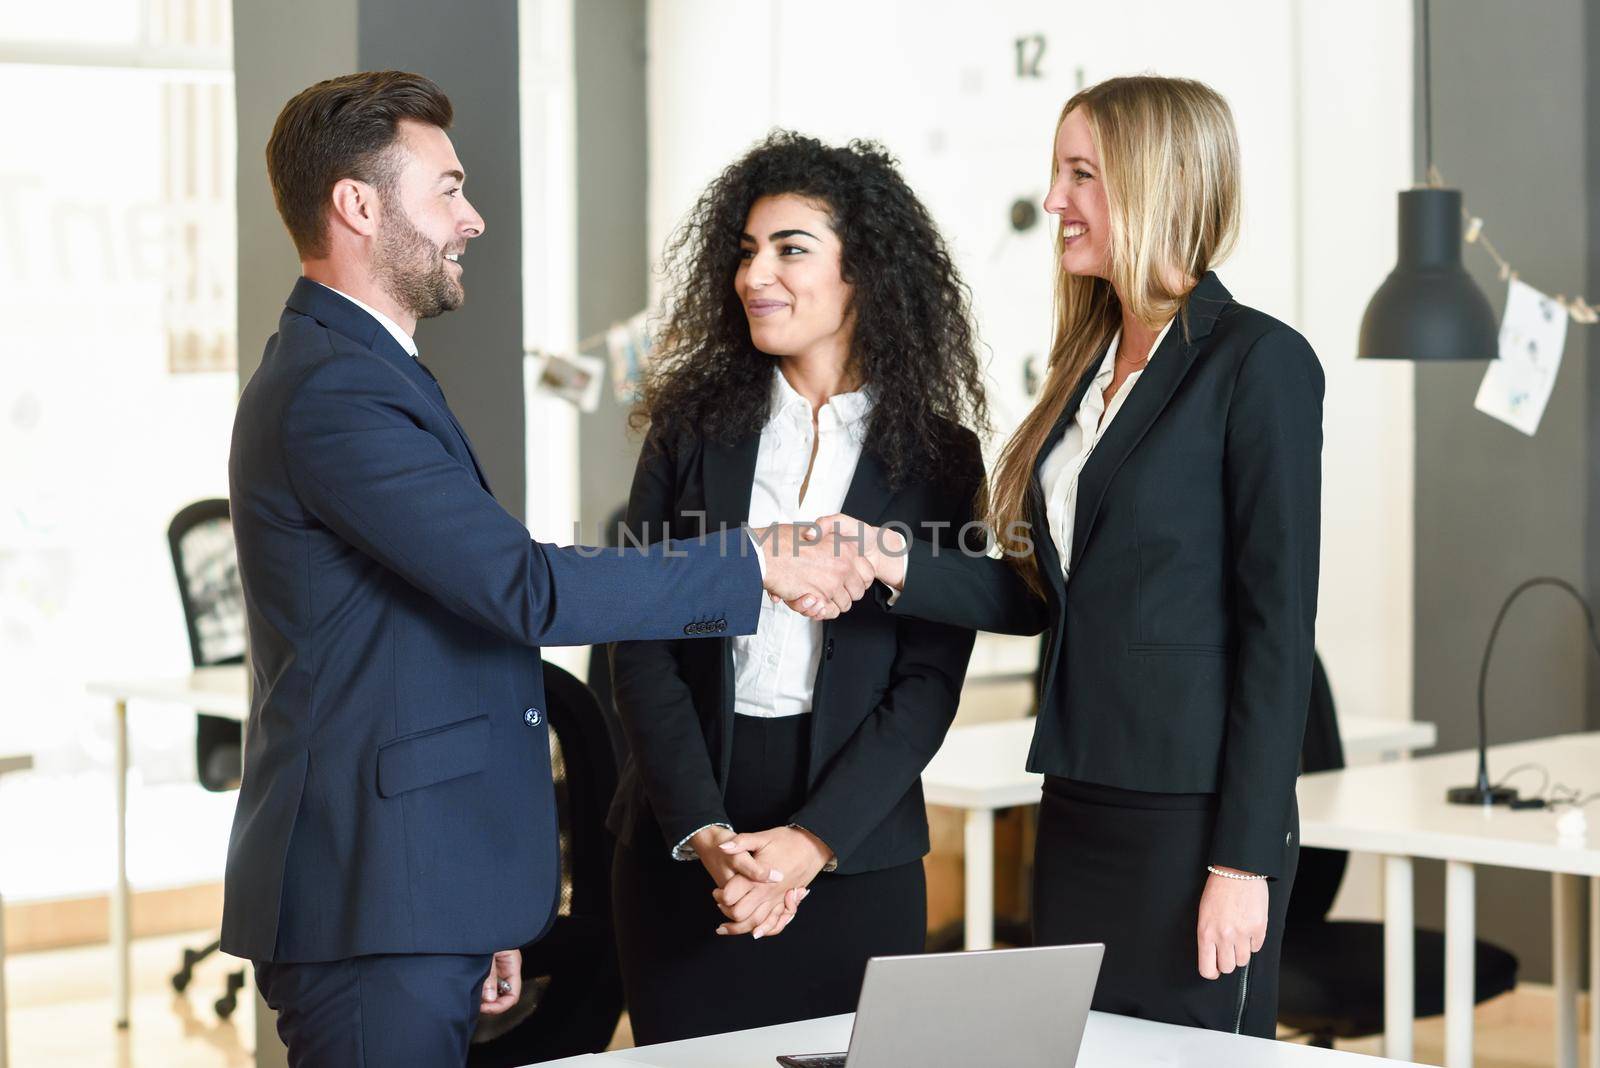 Multi-ethnic group of three businesspeople meeting in a modern office. Caucasian man and woman shaking hands wearing suit.